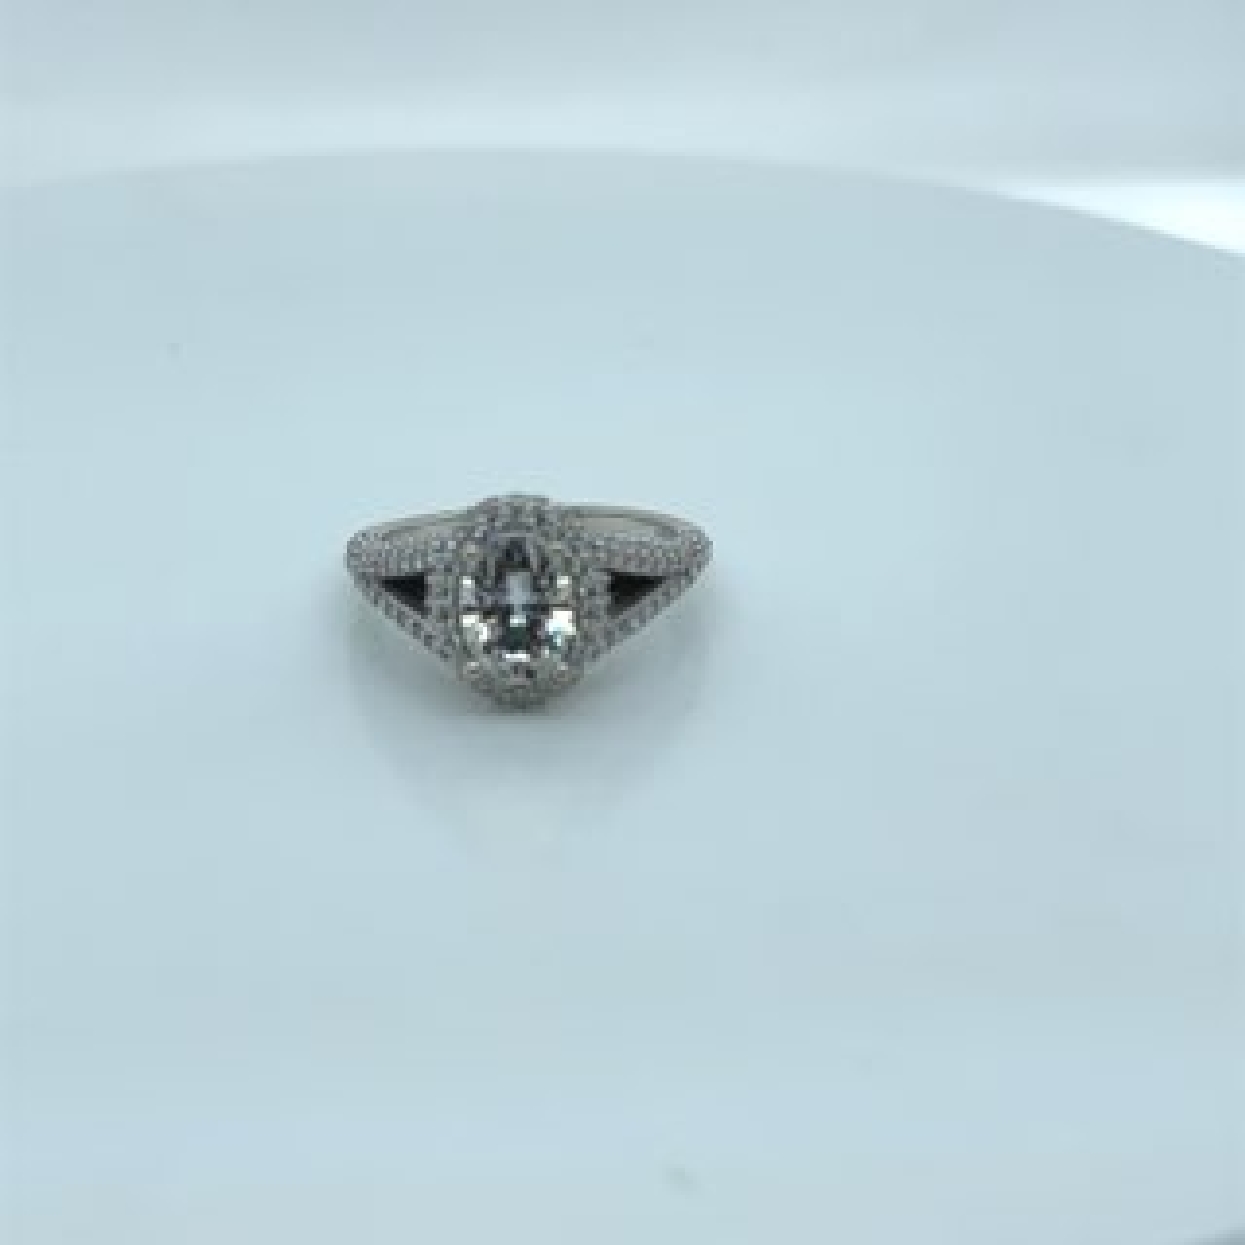 14K White Gold Oval Moissanite Engagement Ring with Diamond Accents Size 6.5 
132 Diamonds 